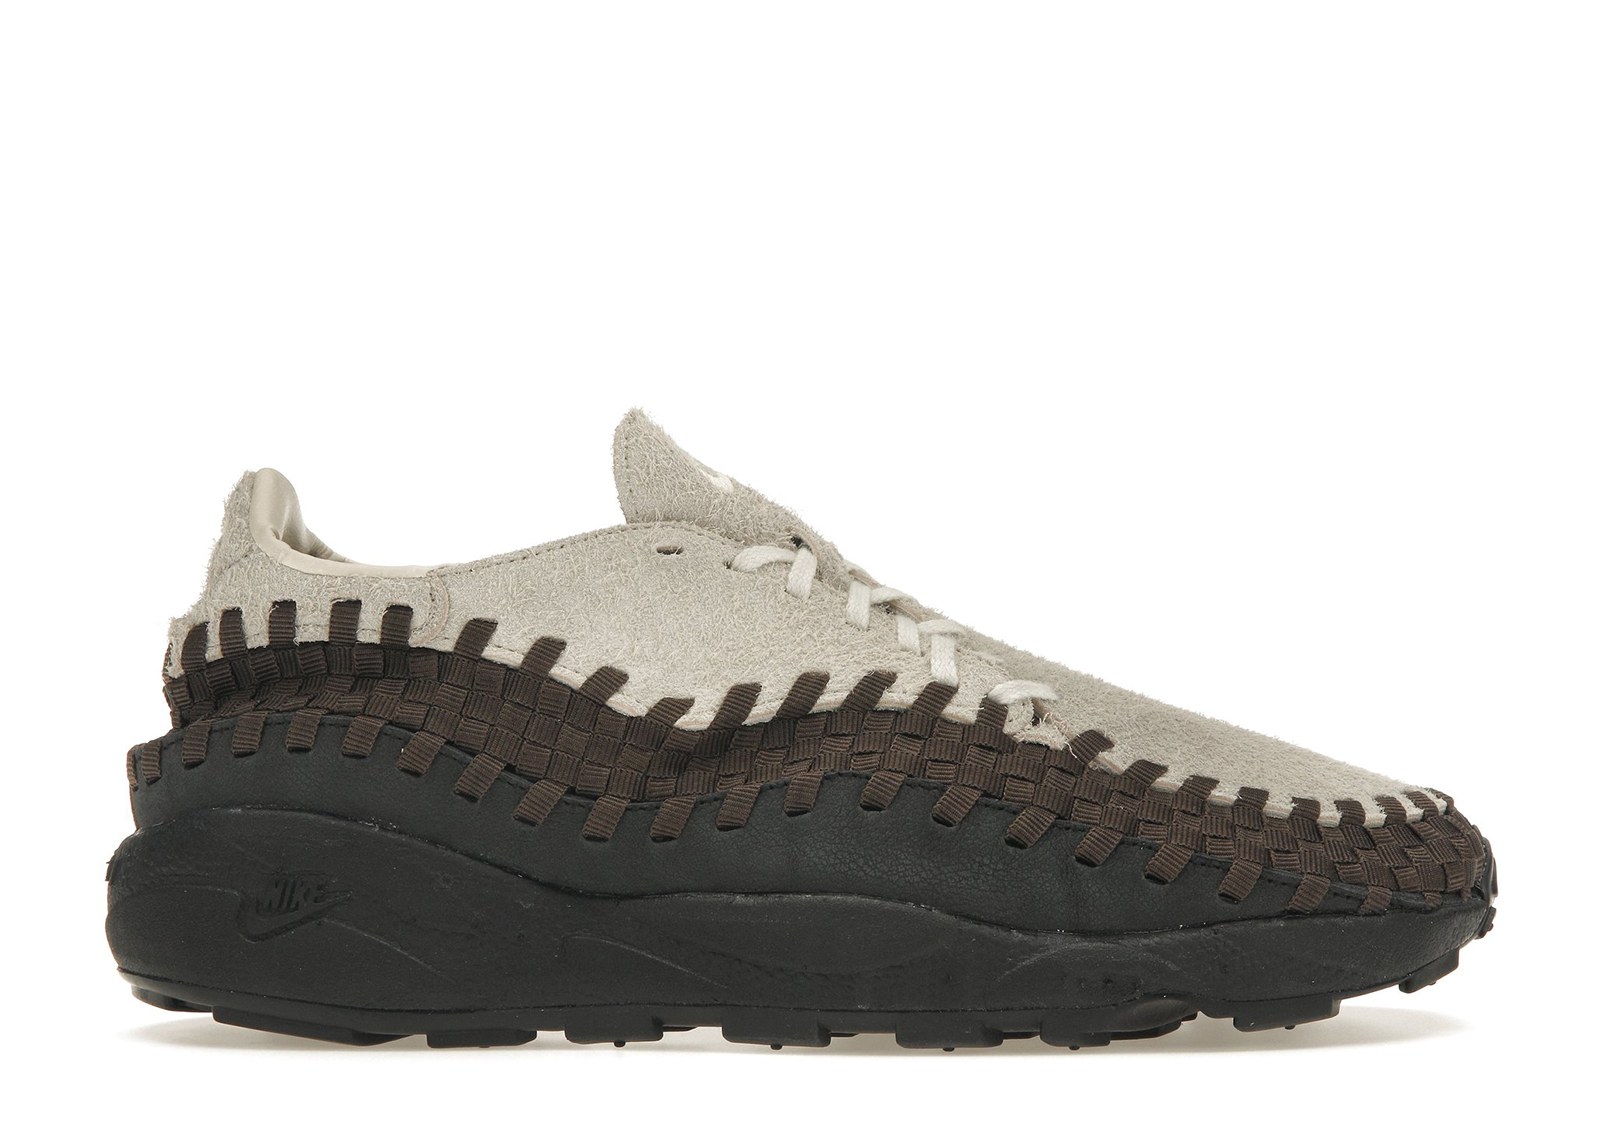 Nike Air Footscape Woven Light Orewood Brown Coconut Milk (Women's)